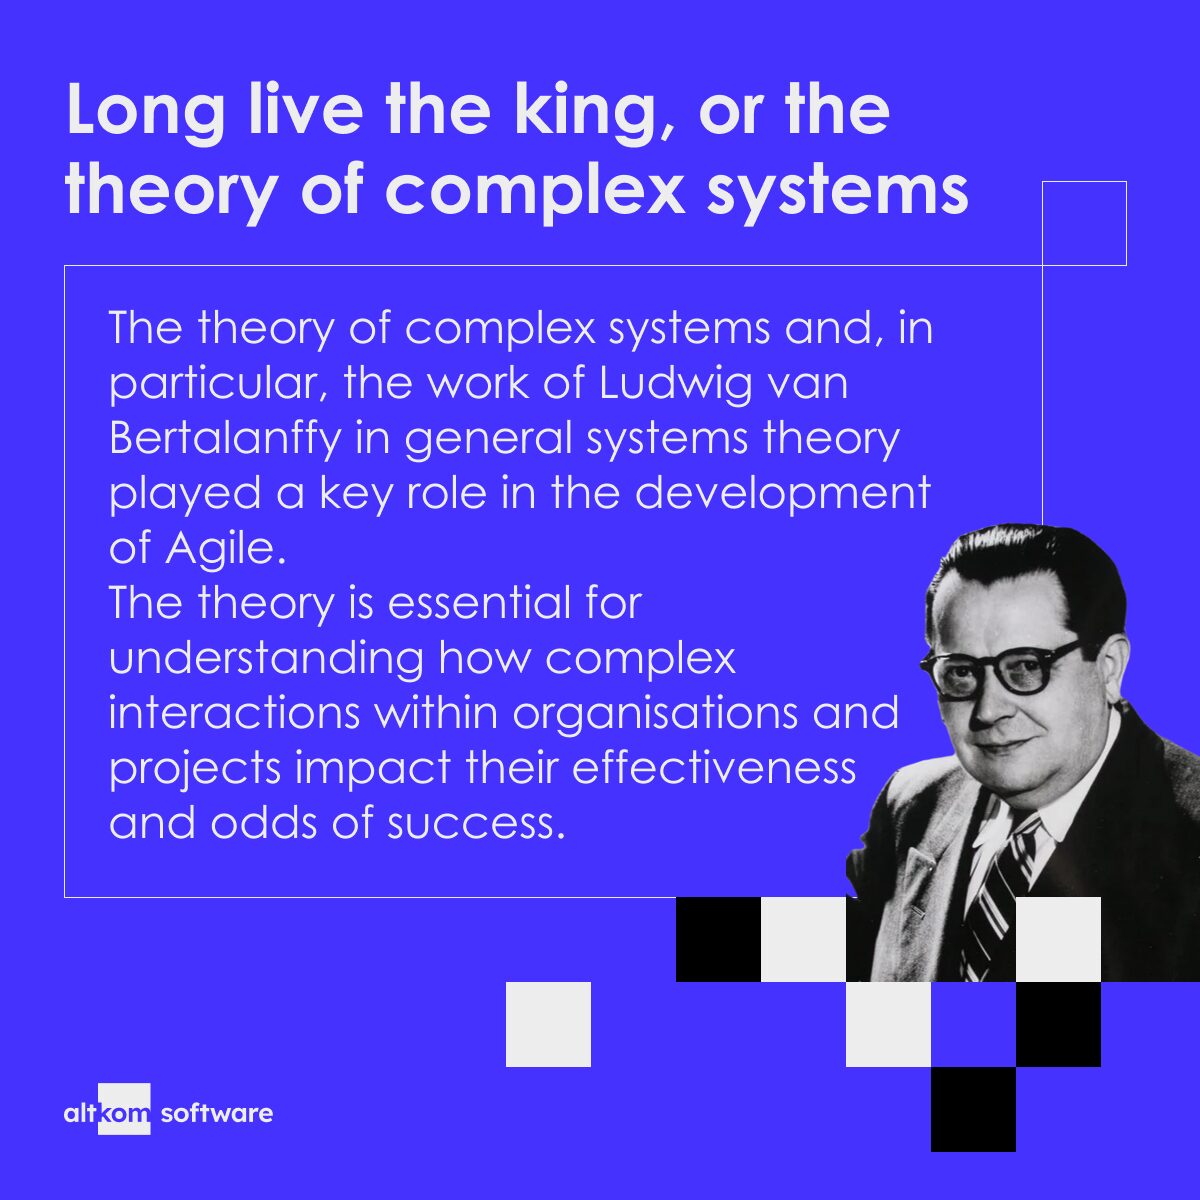 Long live the king, or the theory of complex systems: The theory of complex systems and, in particular, the work of Ludwig van Bertalanffy in general systems theory played a key role in the development of Agile. The theory is essential for understanding how complex interactions within organisations and projects impact their effectiveness and odds of success.